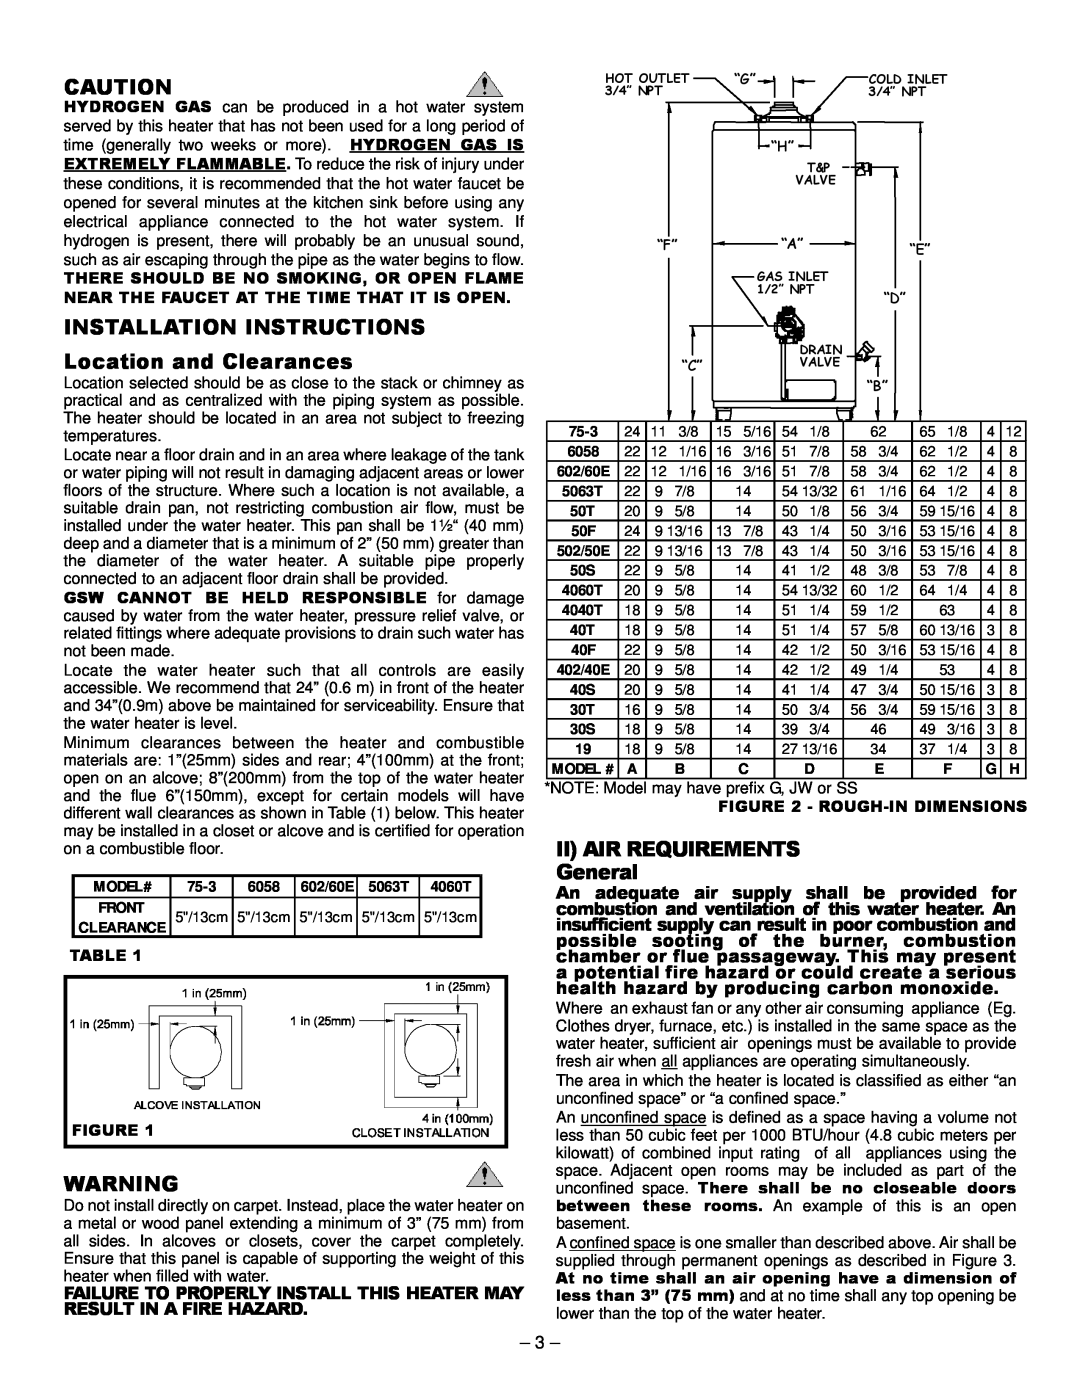 GSW Gas Fired Water Heater INSTALLATION INSTRUCTIONS Location and Clearances, IIAIR REQUIREMENTS General, Table Figure 